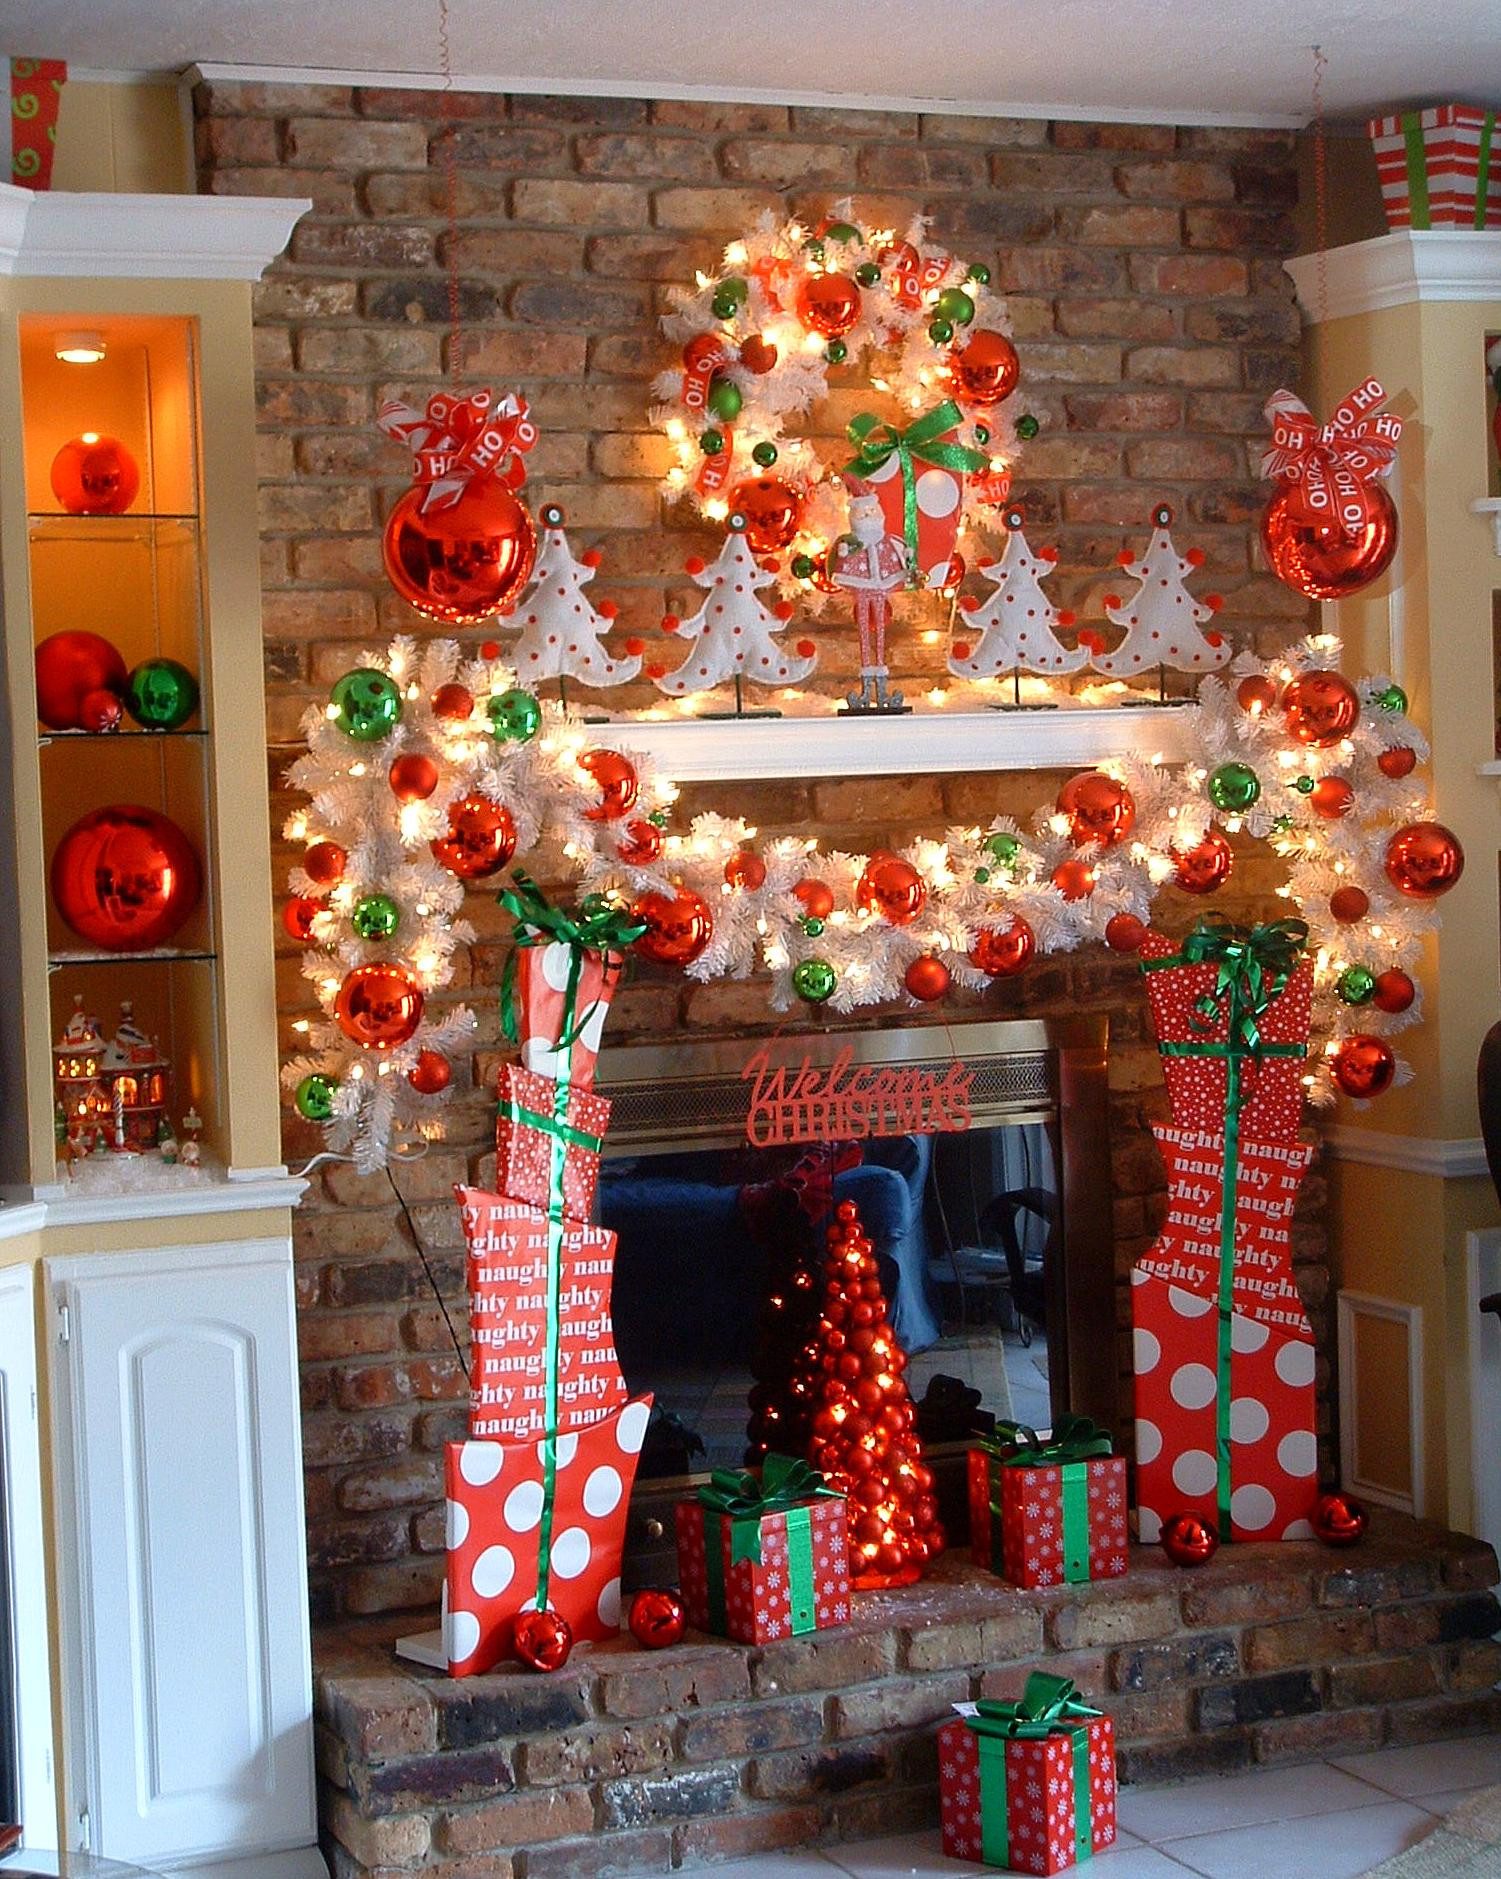 Fireplace Christmas Decorating Ideas
 ADD FIRE TO THE FIREPLACE AREA WITH MESMERIZING DECORATION